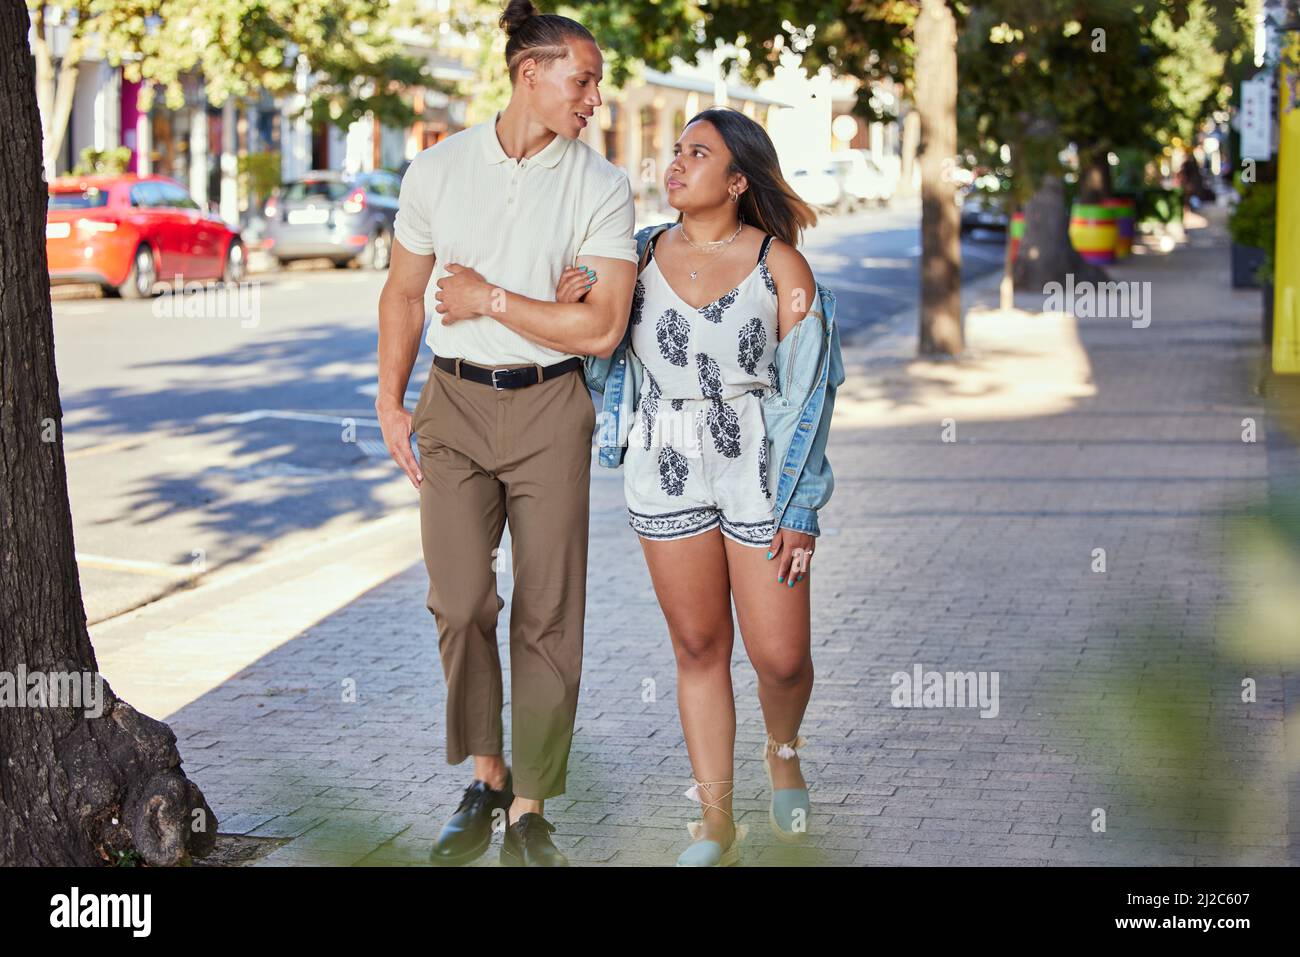 A pathway to love. Shot of a young couple walking in the city. Stock Photo